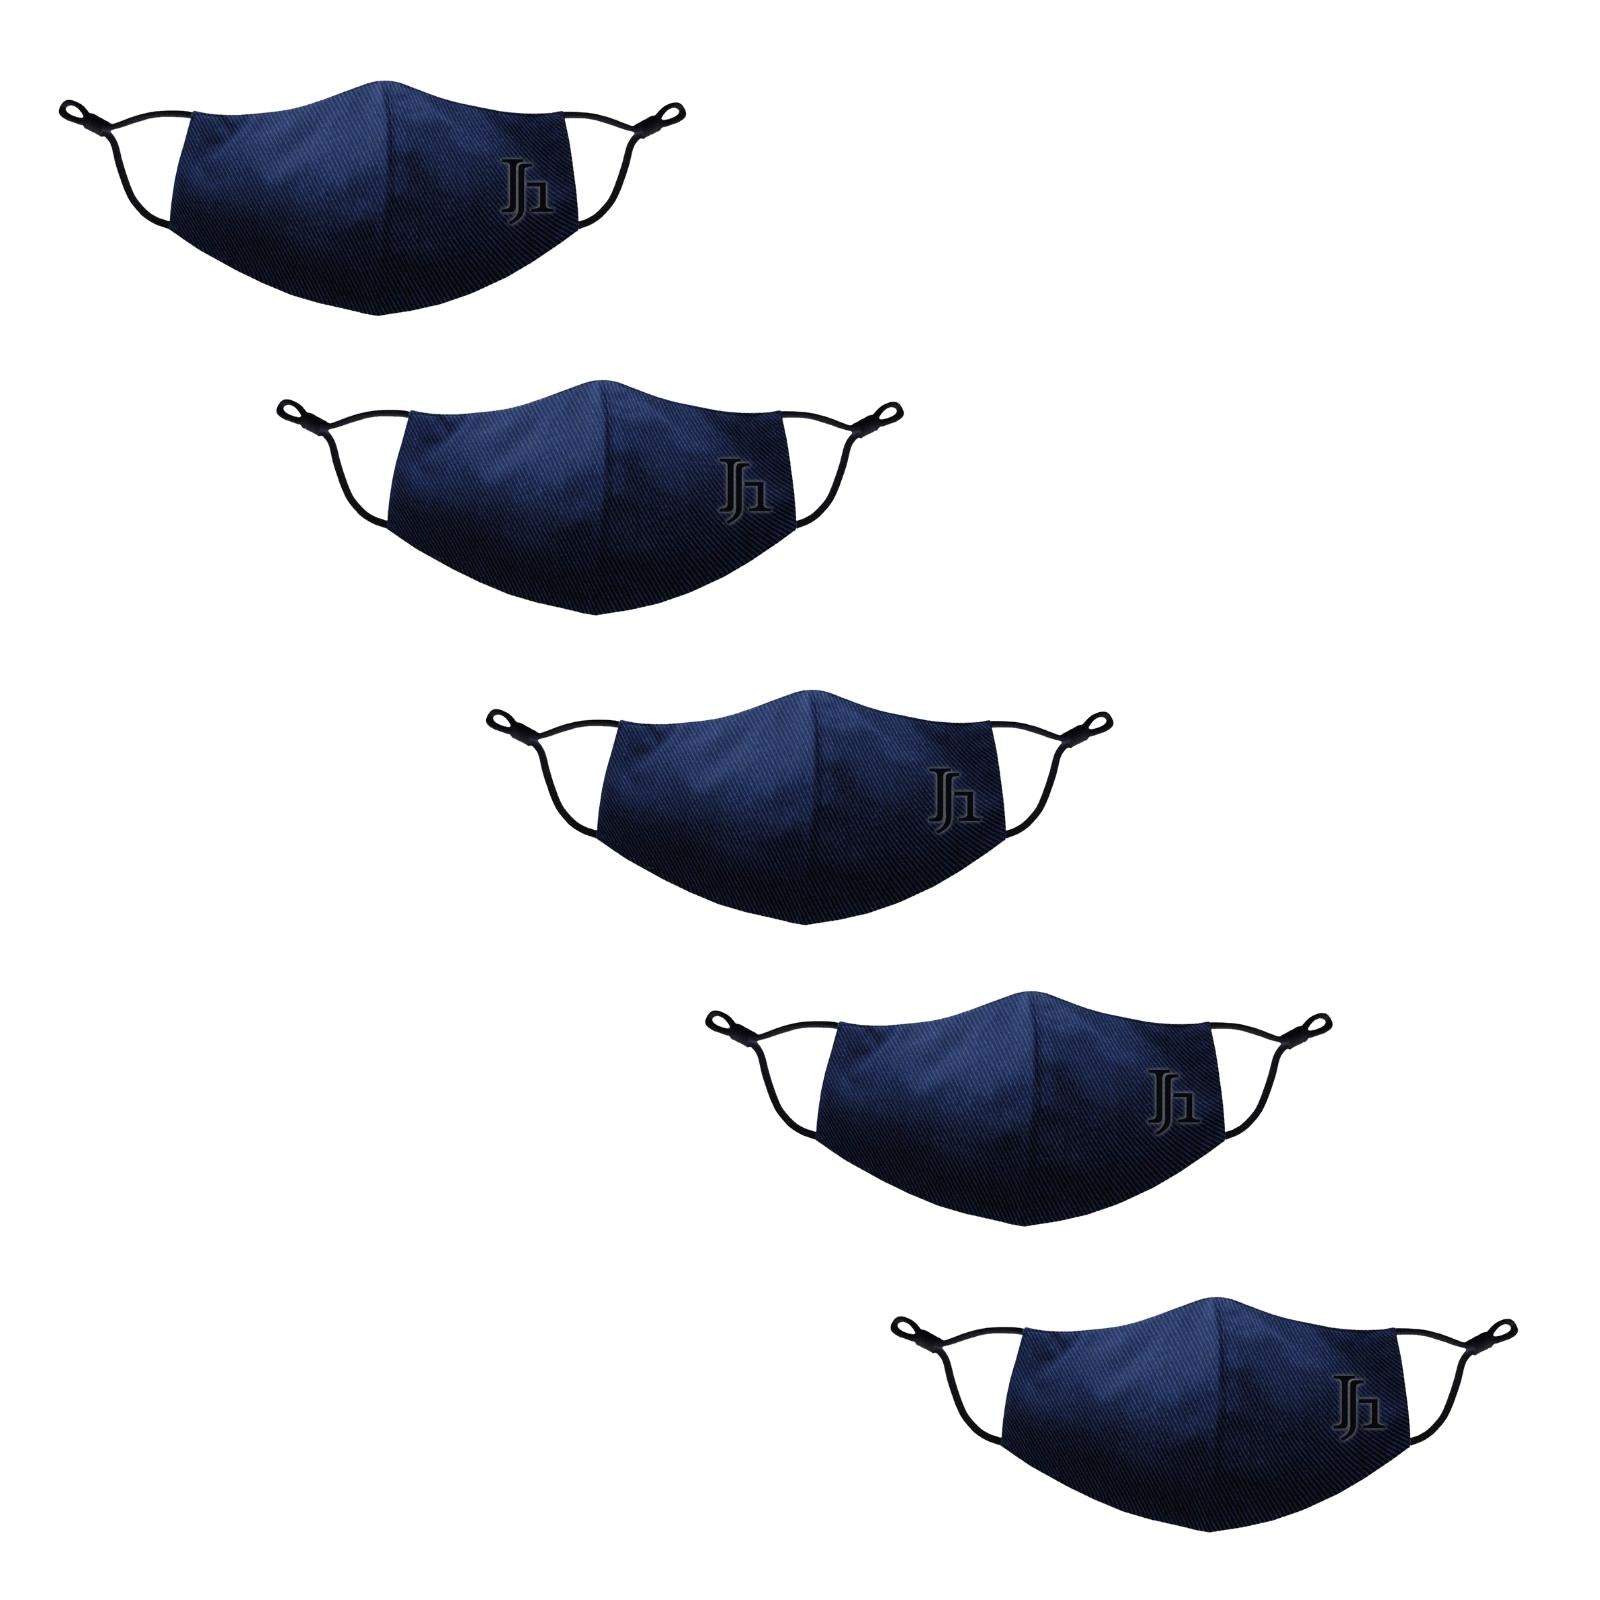 5 Pack of JH Navy Masks